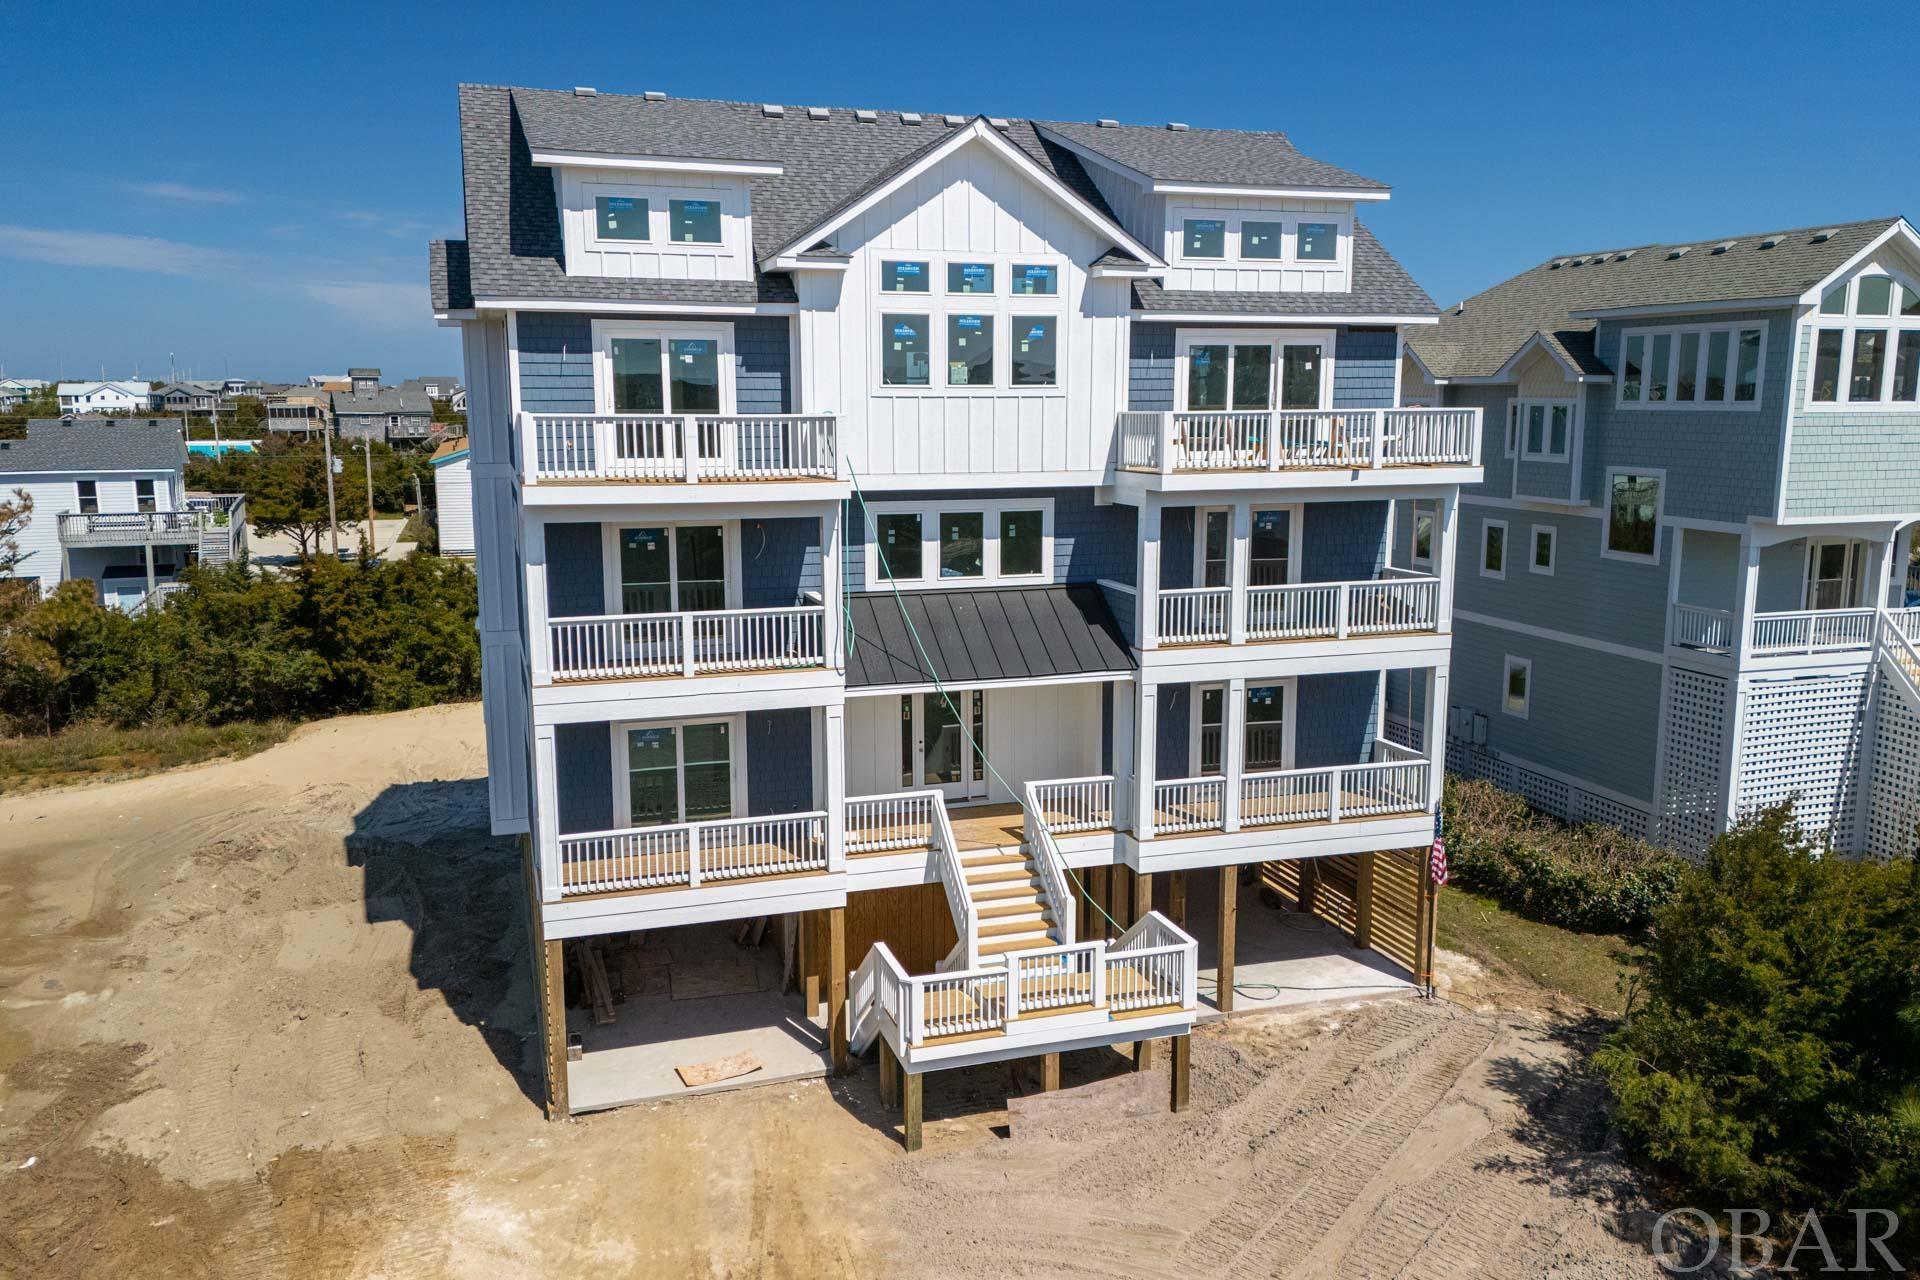 New construction for 2024!  Welcome to your coastal retreat in the upscale community of Hattie Creef Landing in Salvo, NC!  This stunning new construction home is located just 2 lots back from the oceanfront with views off the front decks.    It has easy access to the beach directly through the community.  This is the ultimate in luxury living.  With approximately 5,100 square feet, this eight-bedroom/eight-full and two-half-bath home is perfect for hosting family and friends and is sure to be an incredible rental property!  The top level of the home has an abundance of natural light and boasts a spacious open living area complete with vaulted ceilings, a dining area and a large kitchen featuring two quartz islands for family and friends to enjoy this gourmet kitchen.  Step outside to enjoy the ocean breeze on the multiple outdoor deck spaces and gathering areas. This home is designed for entertainment and relaxation, with a private pool, hot tub, elevator, recreation room, and theater room.  Each bedroom boasts its own ensuite, ensuring privacy and convenience for all guests.  Built in 2024 by Sandalwood Construction, a premier builder with over 40 years of experience designing and building fine homes on the Outer Banks, this home is built to the highest standards of quality and durability. The combination of roof shingles, exterior siding, composite trim, windows, doors, and construction techniques ensures low maintenance and a sustainable home for years to come. Don't miss your opportunity to own this coastal oasis!  Schedule your showing today and start enjoying everything that Hatteras Island has to offer, including pristine uncrowded beaches, world-class kiteboarding and surfing, fishing, and amazing local restaurants. The home is sold fully furnished and completely rental ready with beautiful furniture and decor. Smart tv's throughout the home and in every bedroom. This an amazing new construction opportunity!!